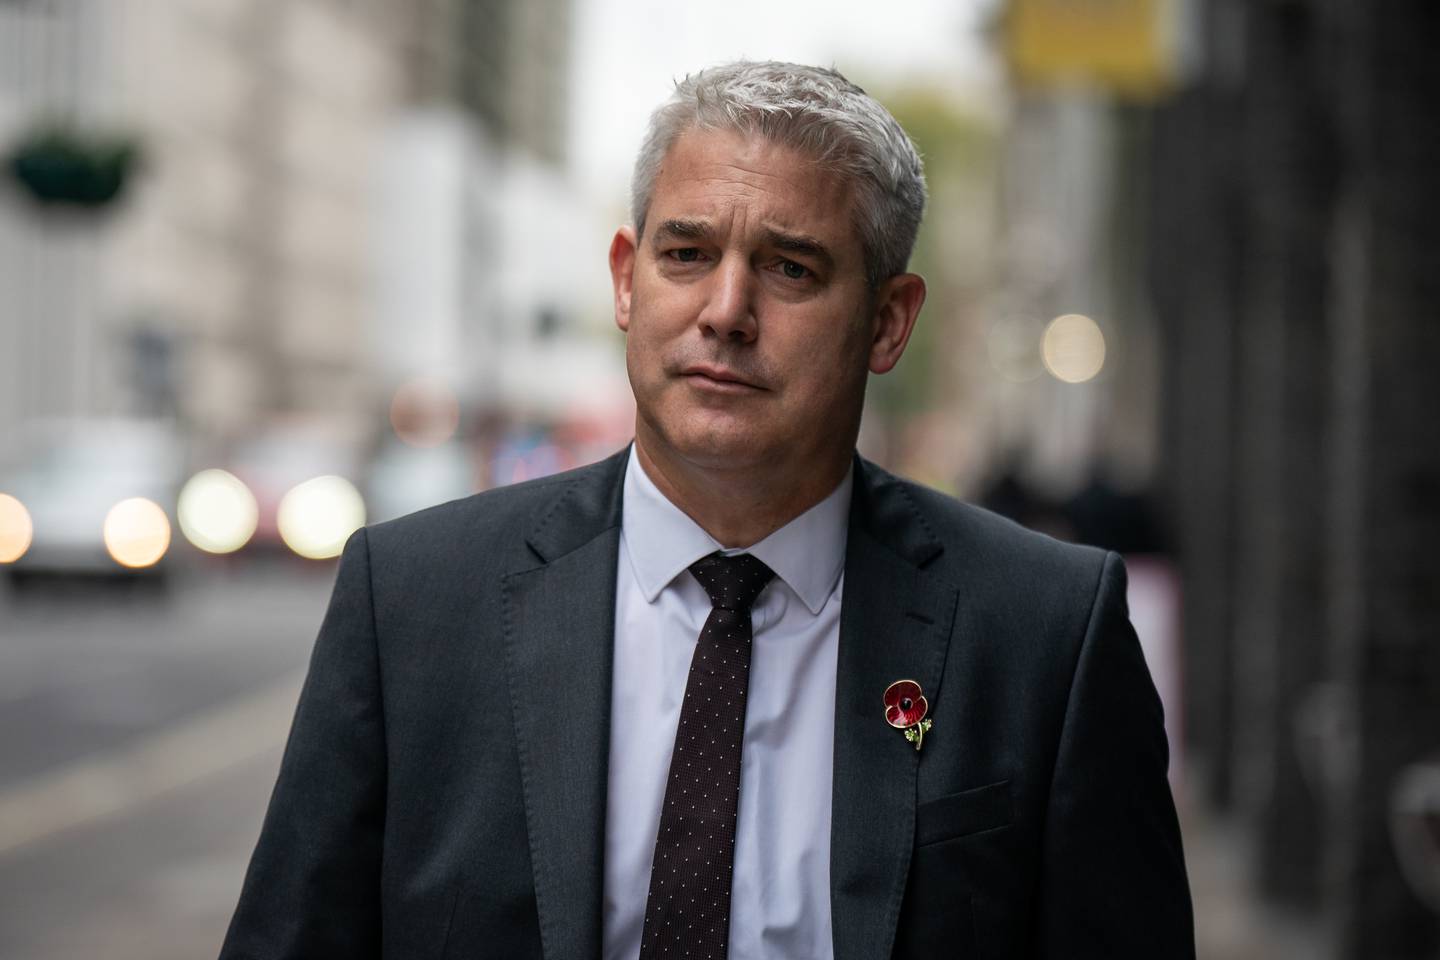 Health Secretary Steve Barclay before his meeting with Pat Cullen, the head of the Royal College of Nurses, as he tries to avert strike action. PA